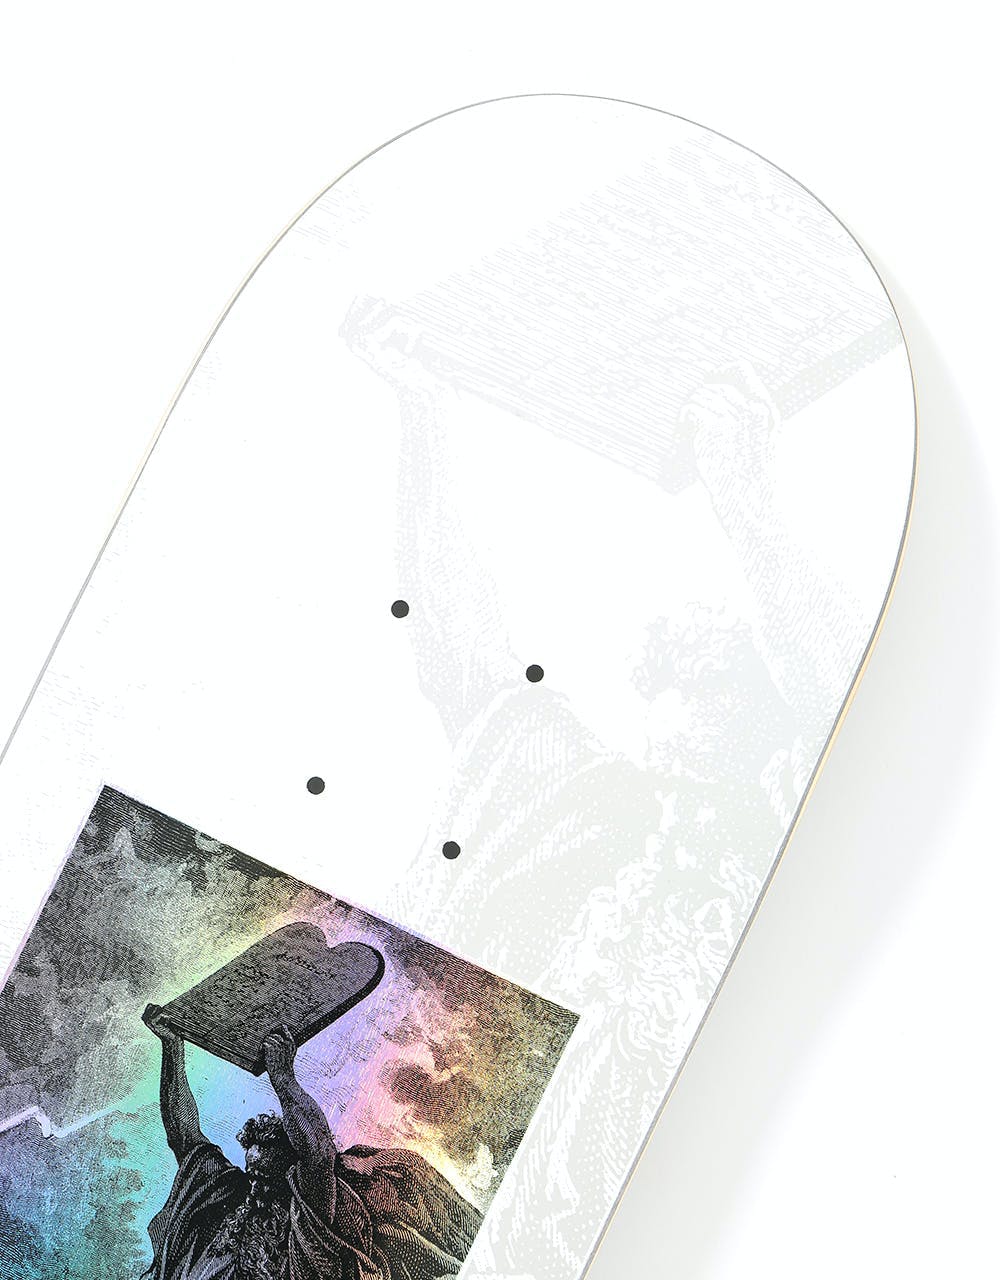 Route One Tablets of Law Skateboard Deck - 8.75"